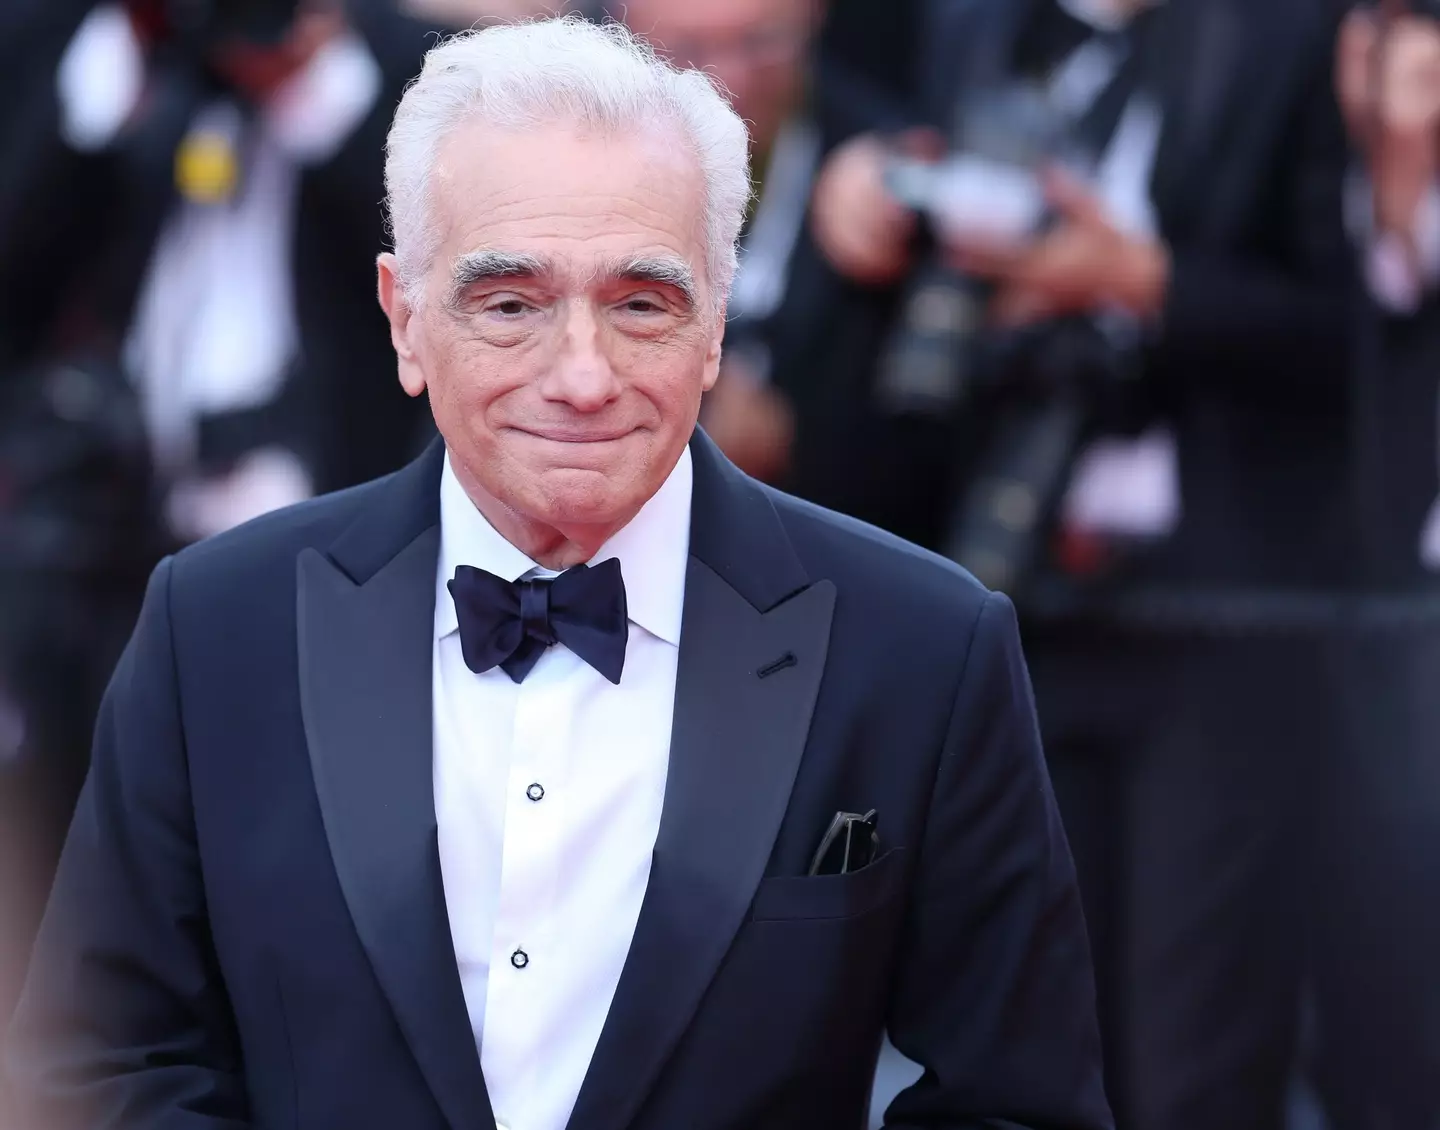 Scorsese allegedly agreed to become executive producer on a new movie, but failed to fulfil his side of the deal.